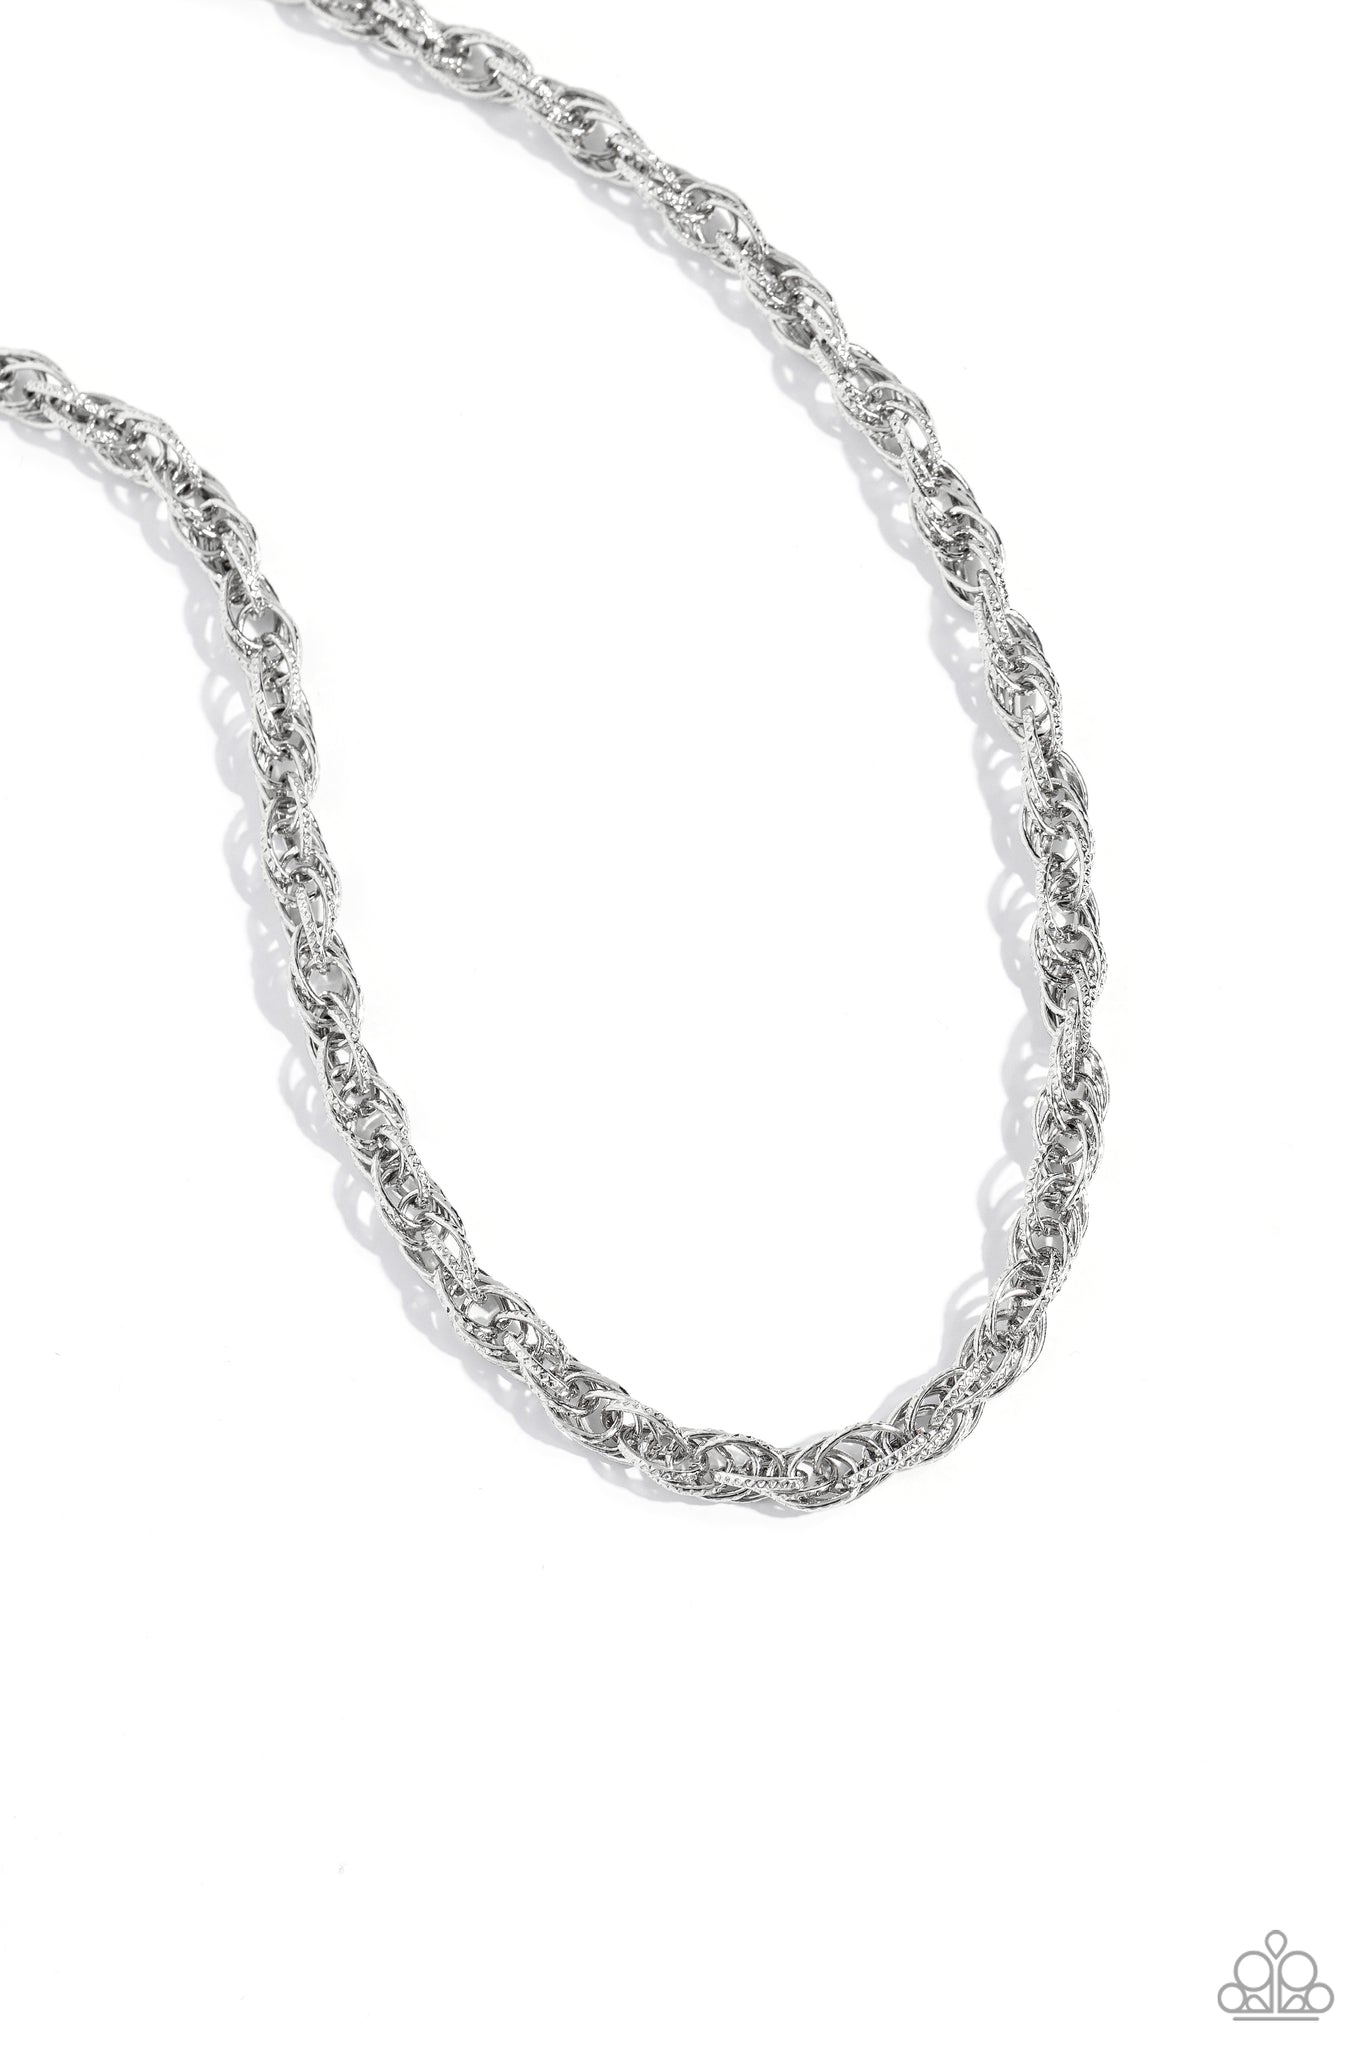 Miabella Solid 925 Sterling Silver Italian 2mm, 3mm Diamond-Cut Braided  Rope Chain Necklace for Men Women Made in Italy 16, 18, 20, 22, 24, 26, 28,  30 Inch (22, 2mm) : Buy